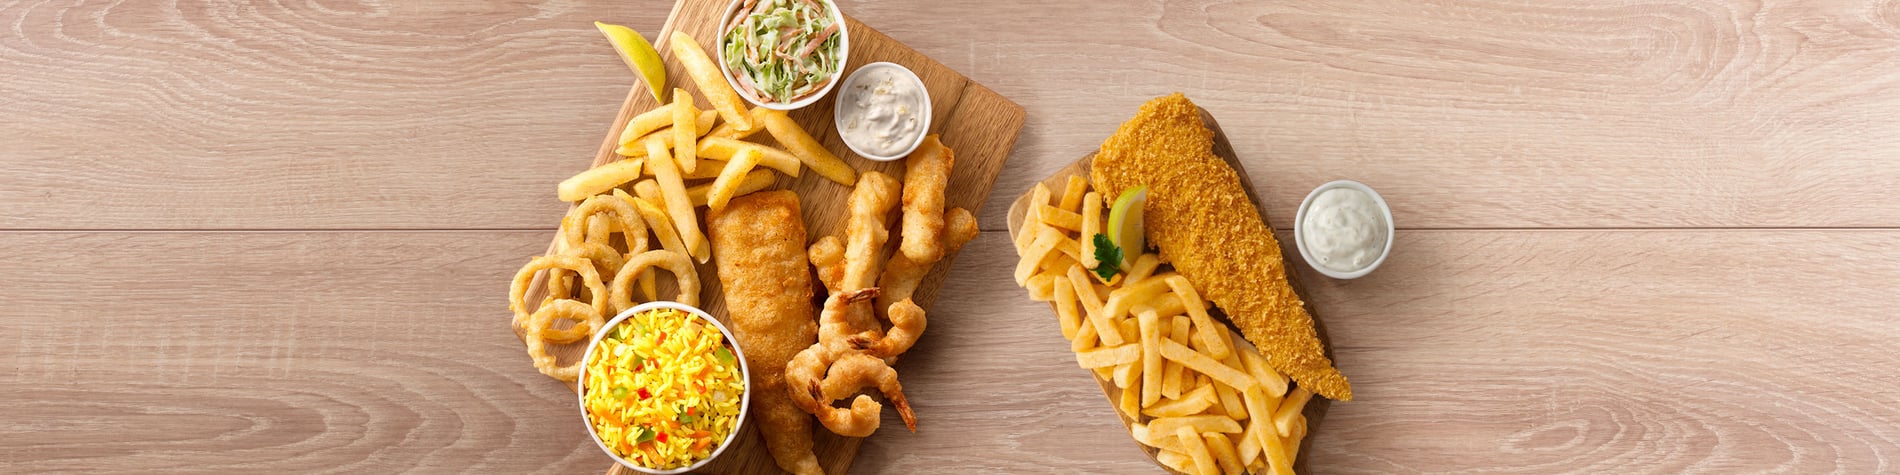 Seafood meals from Fishaways Carlton Centre including a Crunchy Fish and Chips meal and a seafood Platter for One with hake, calamari, prawns, chips, onion rings, and coleslaw.